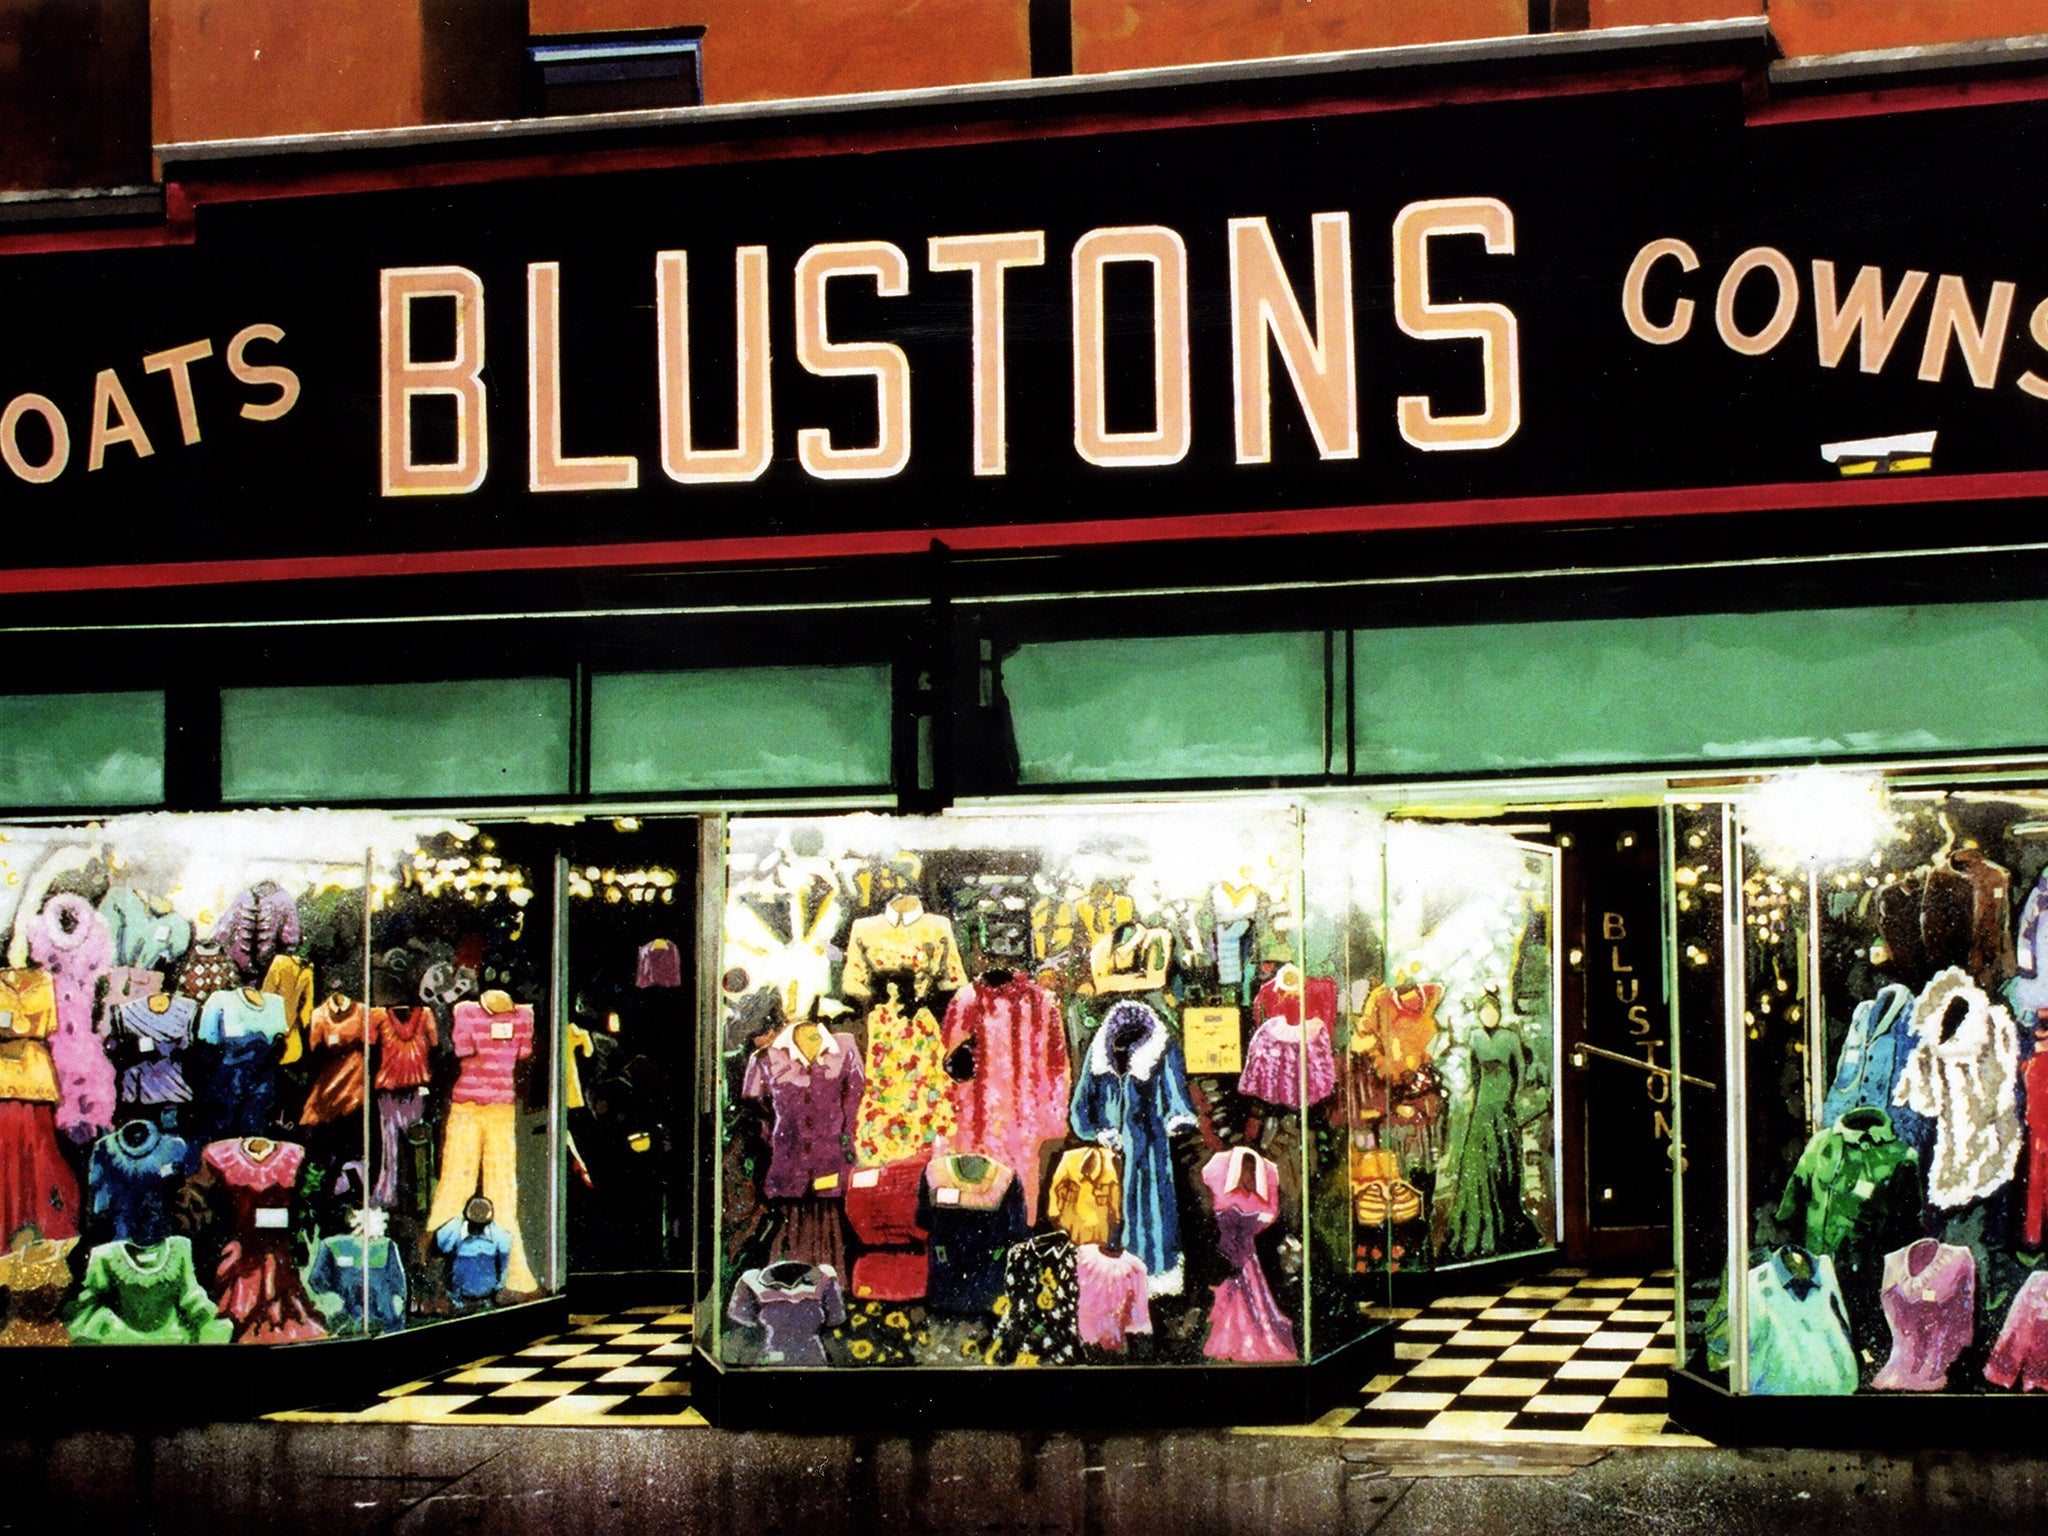 Blustons in its heyday, as painted by Stuart Free